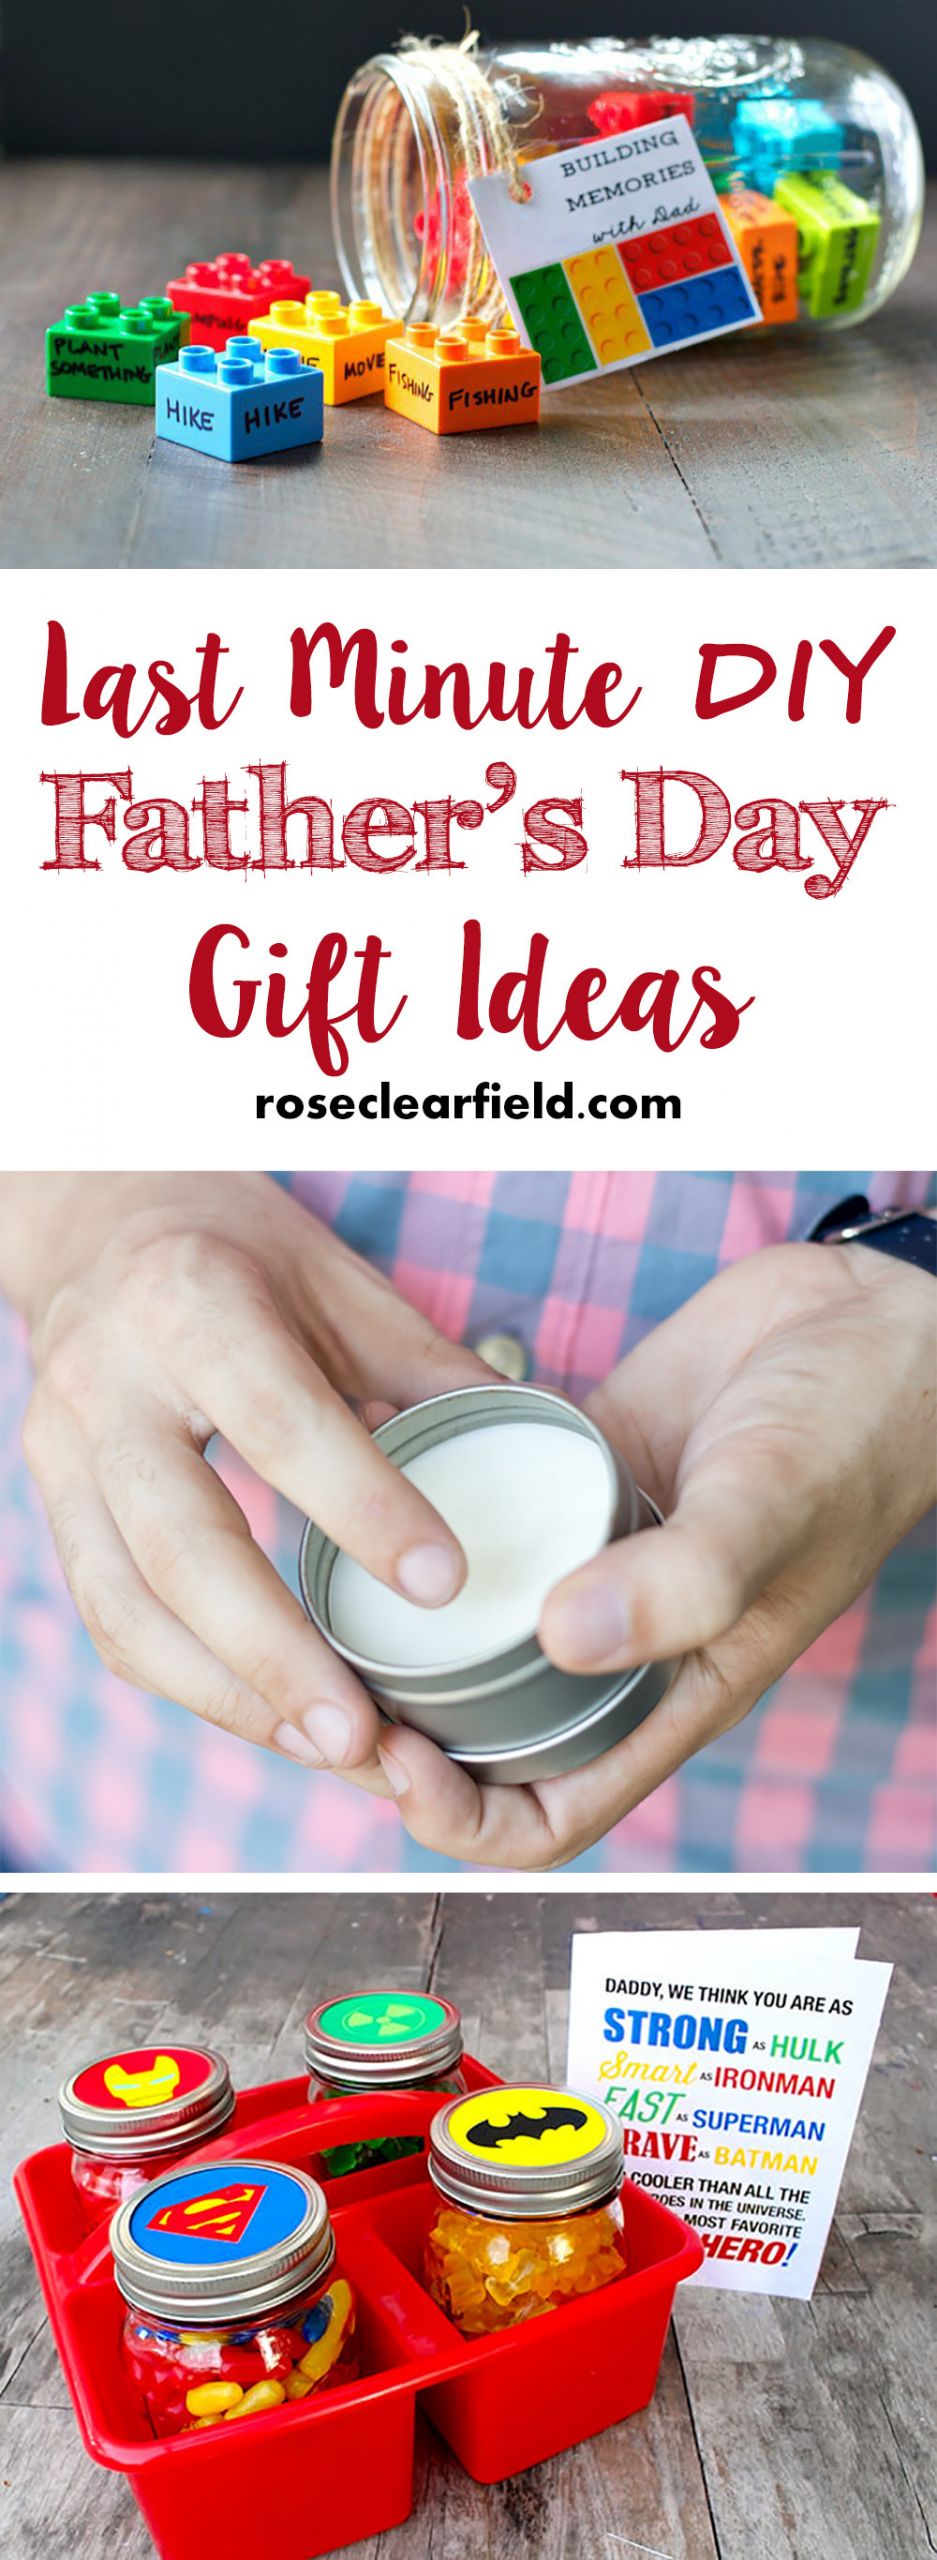 Simple Fathers Day Gift Ideas
 Last Minute DIY Father s Day Gift Ideas • Rose Clearfield